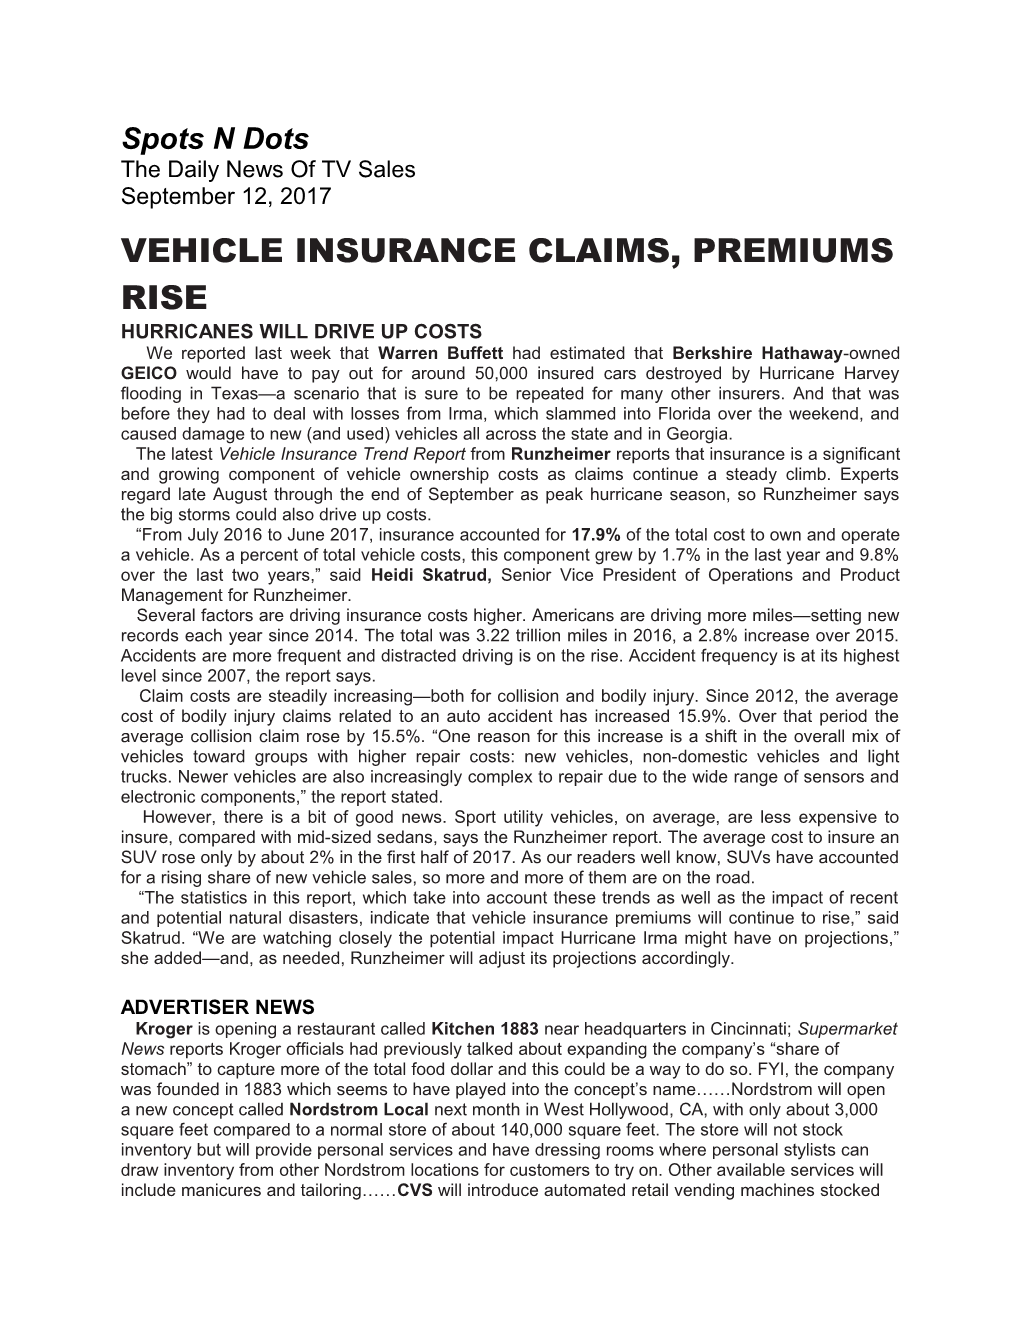 Vehicle Insurance Claims, Premiums Rise